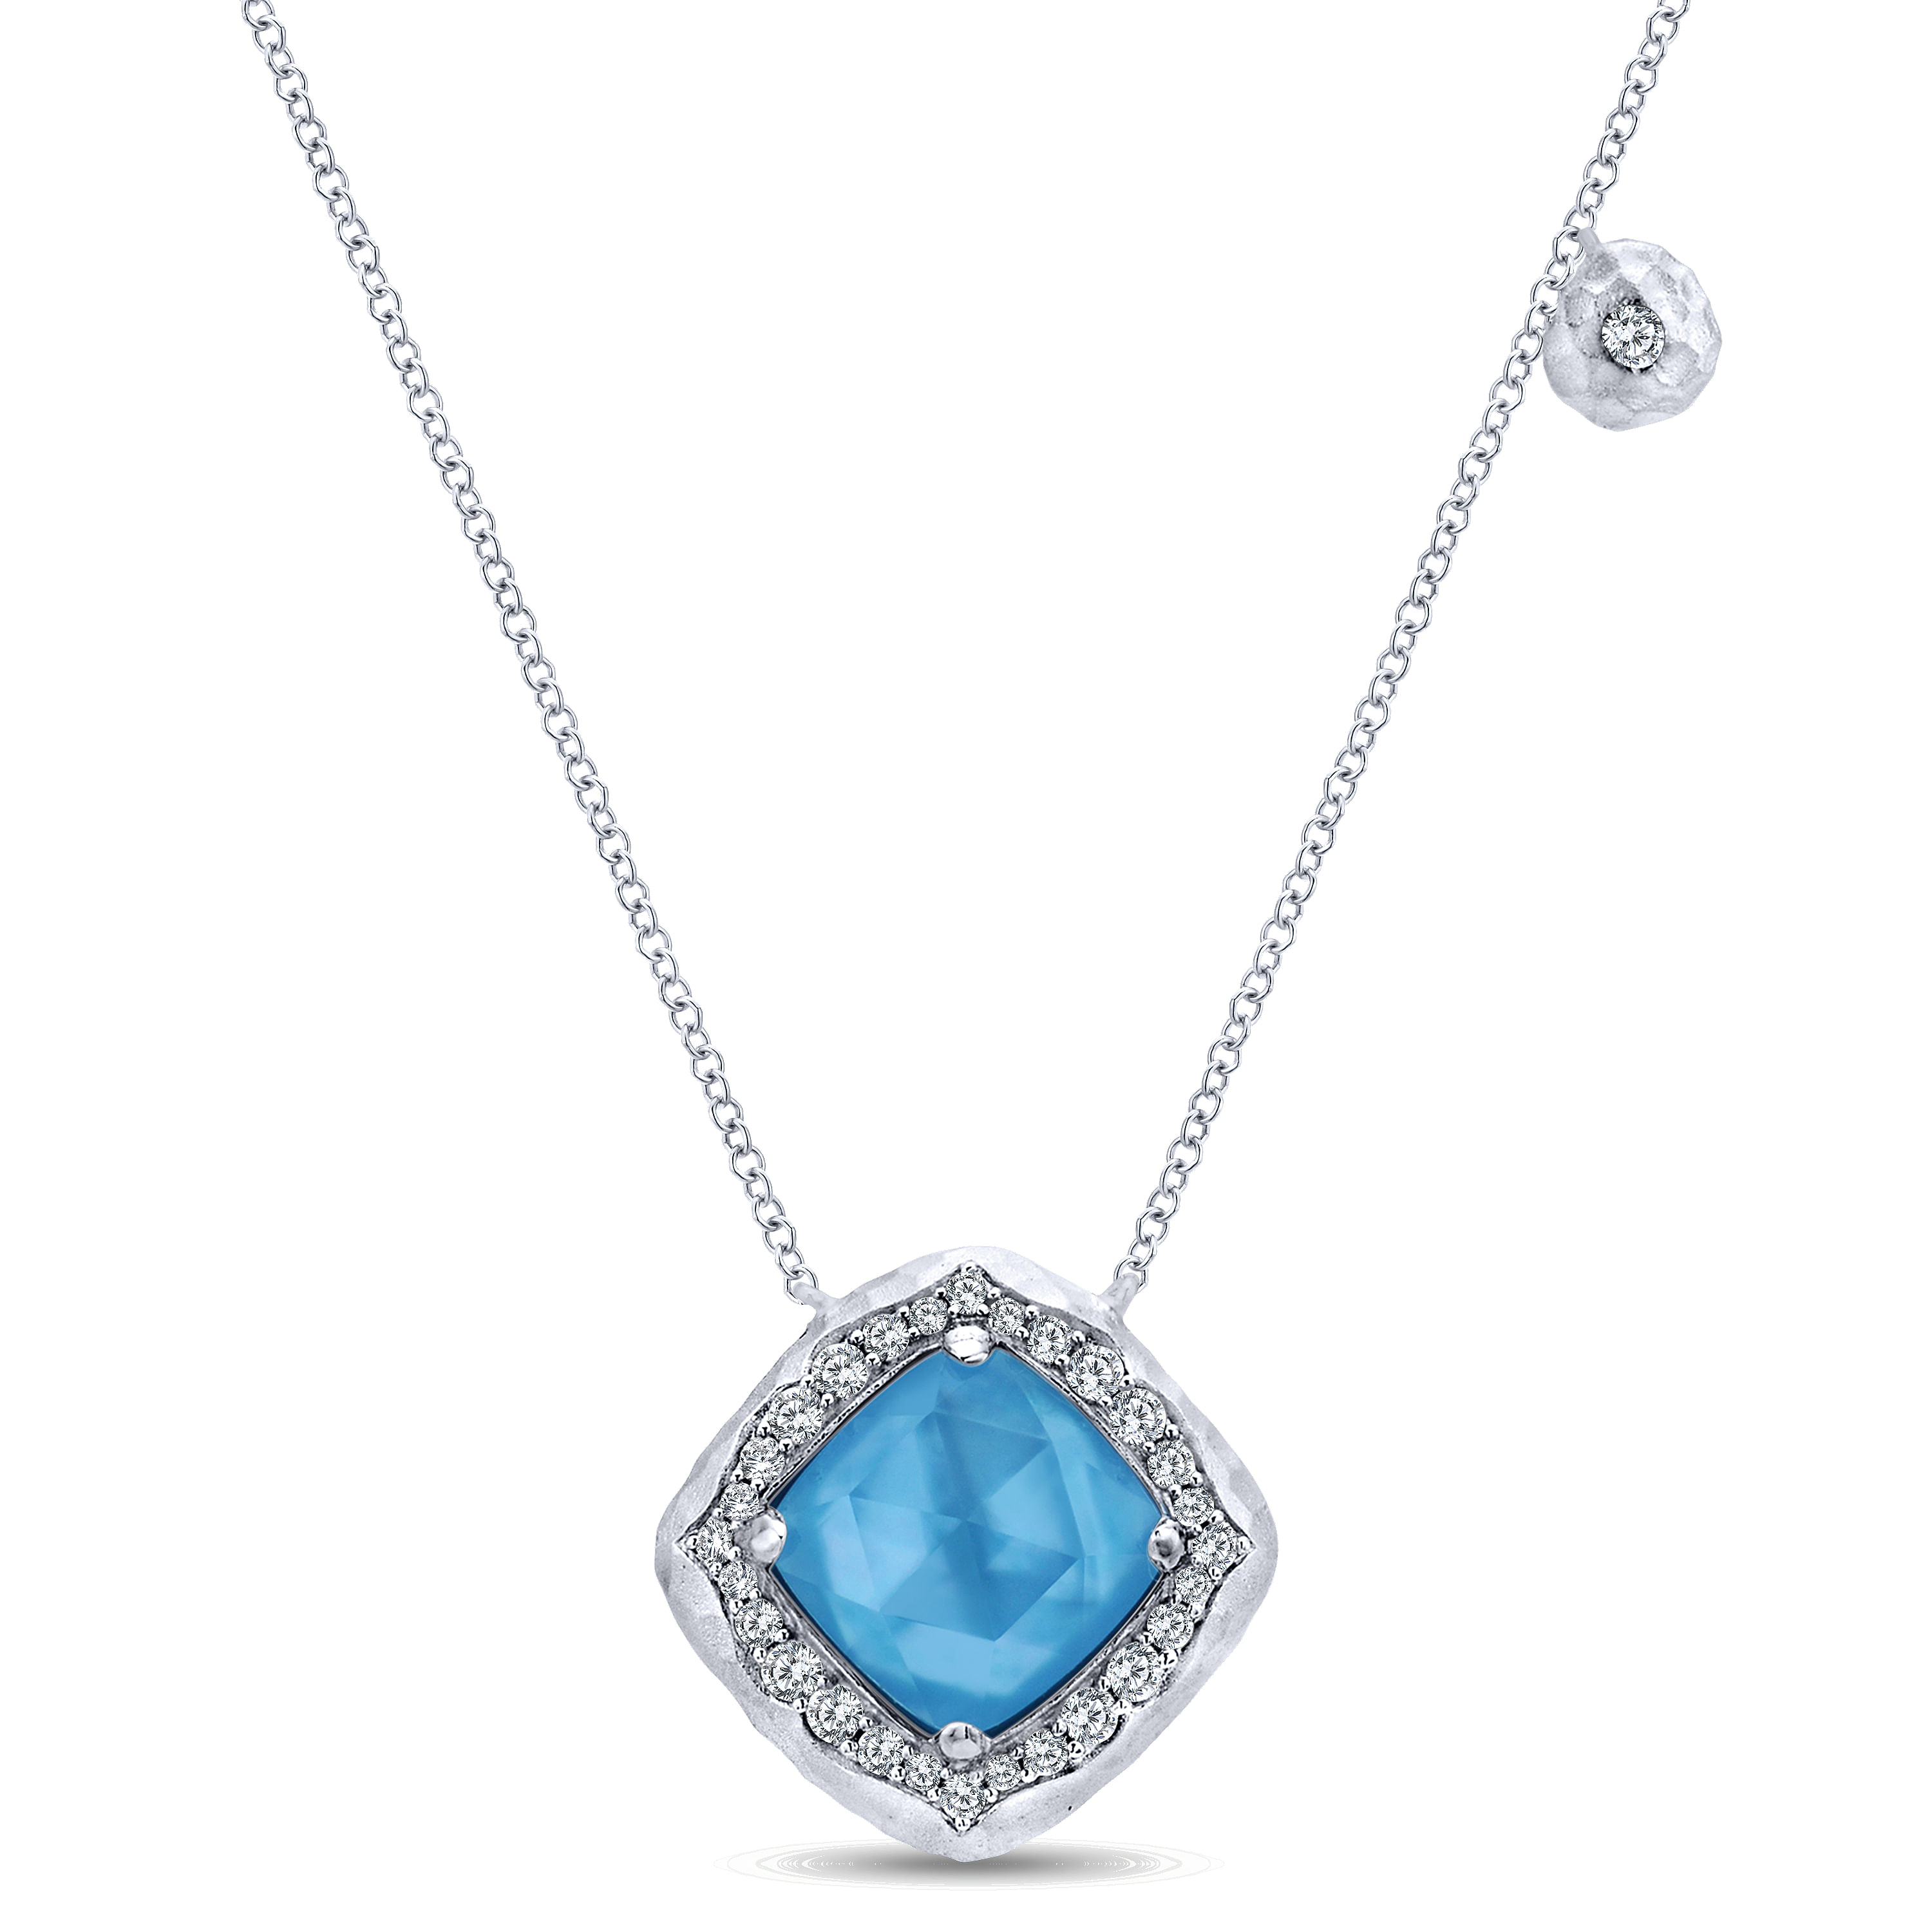 Gabriel - 925 Sterling Silver Hammered Rock Crystal/White MOP/Turquoise and White Sapphire Pendant Necklace